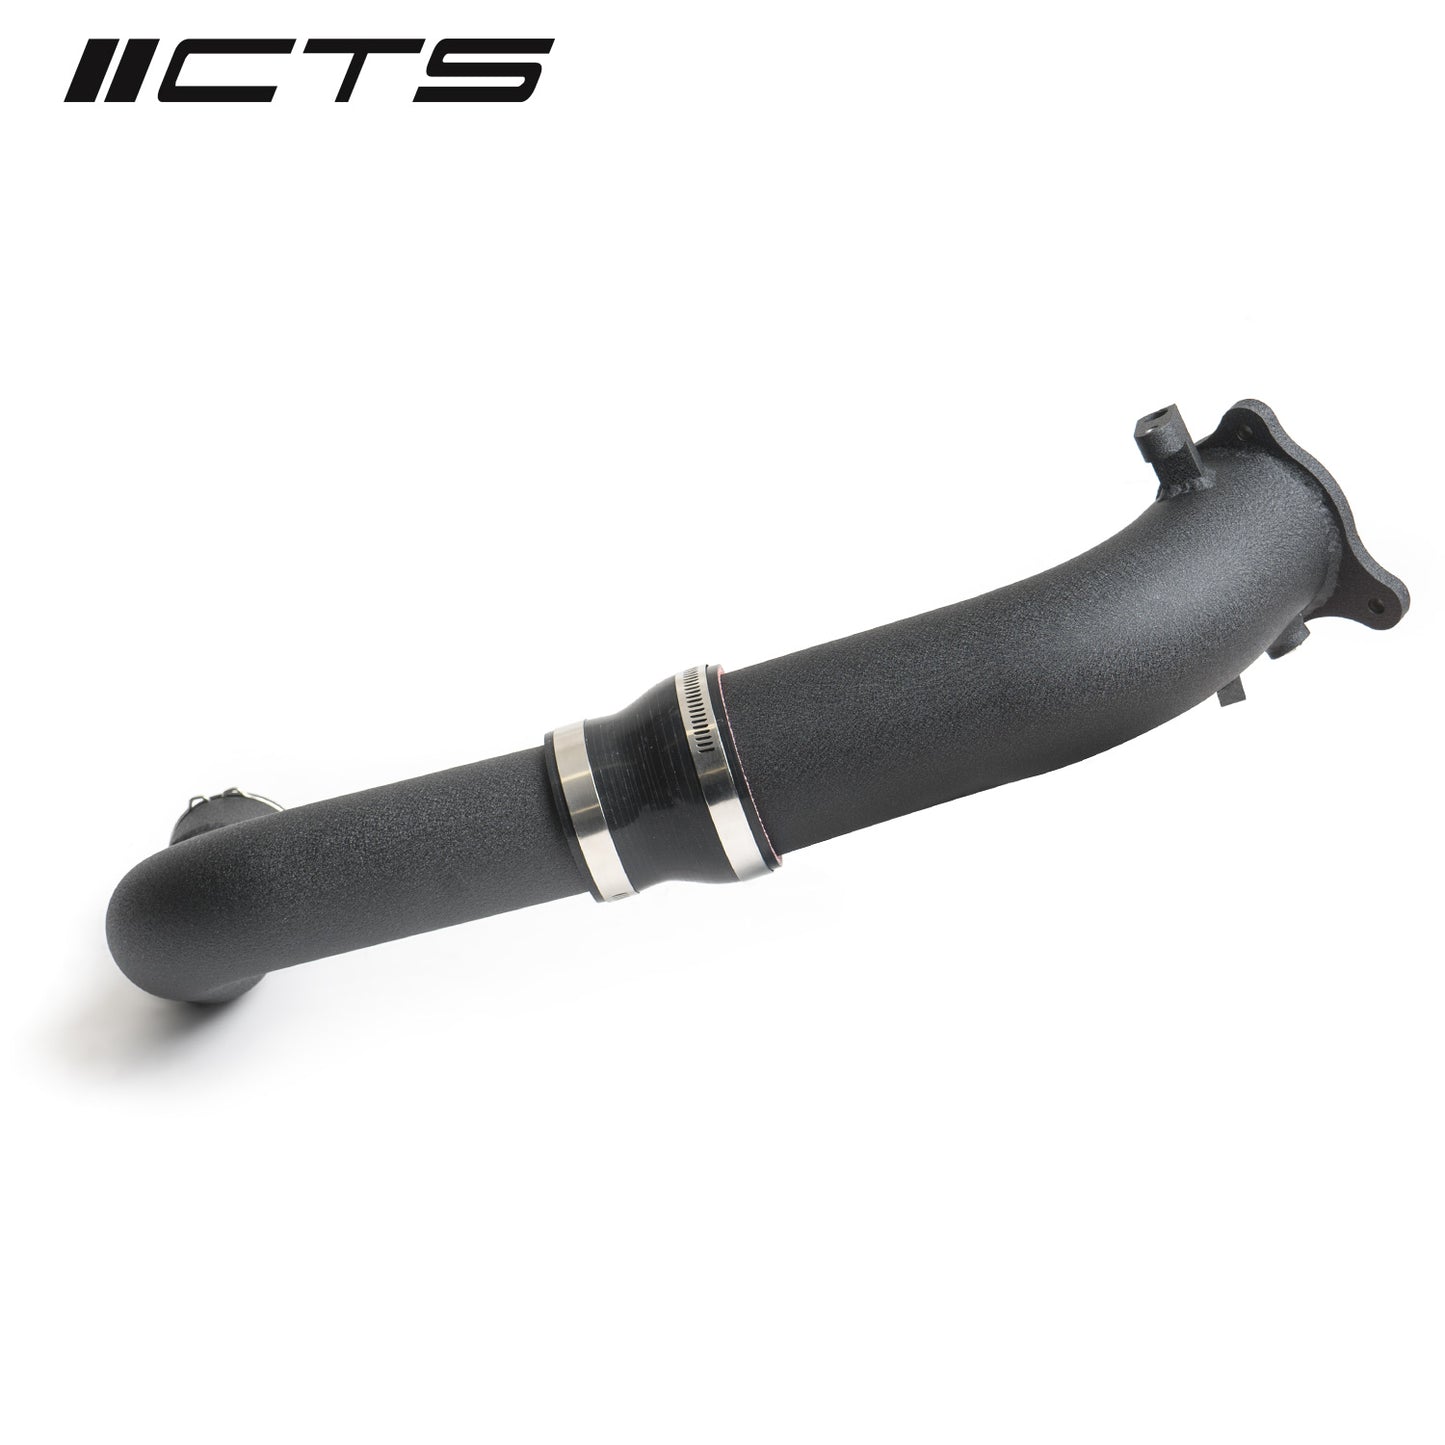 CTS - Chargepipe Upgrade Kit || B46/B48 F Series/G Series